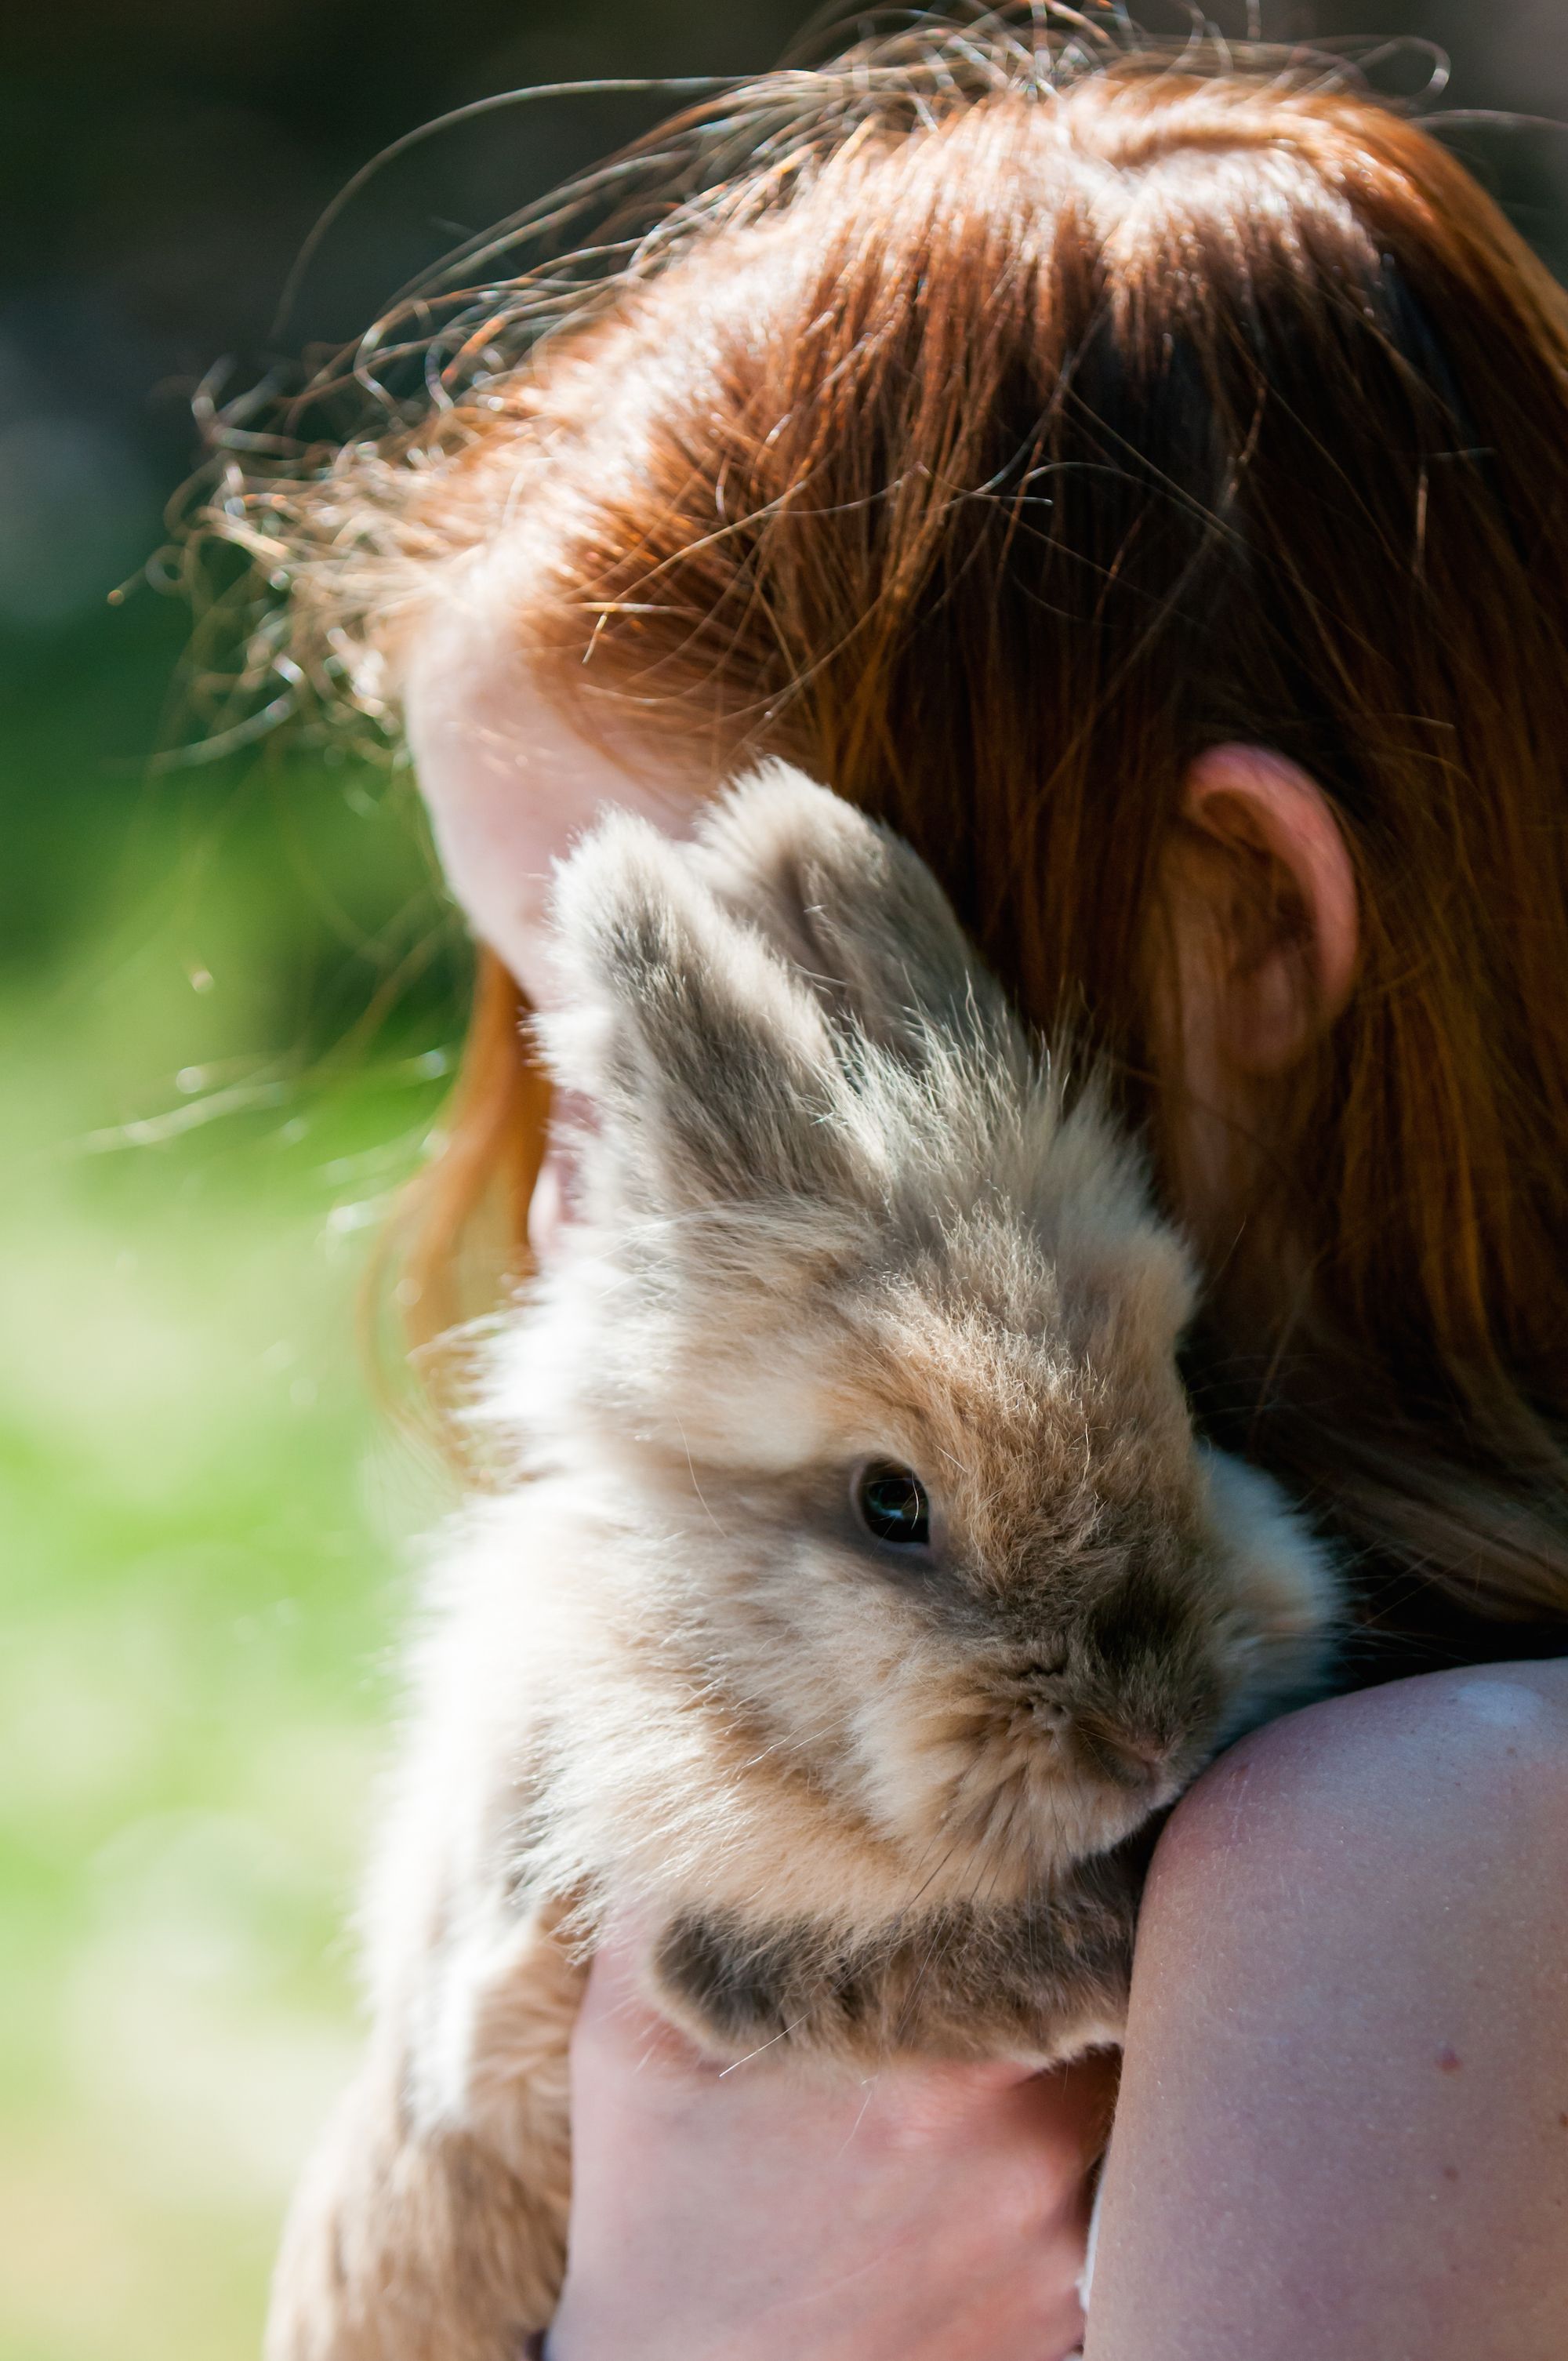 young girl holding and hugging her pet rabbit